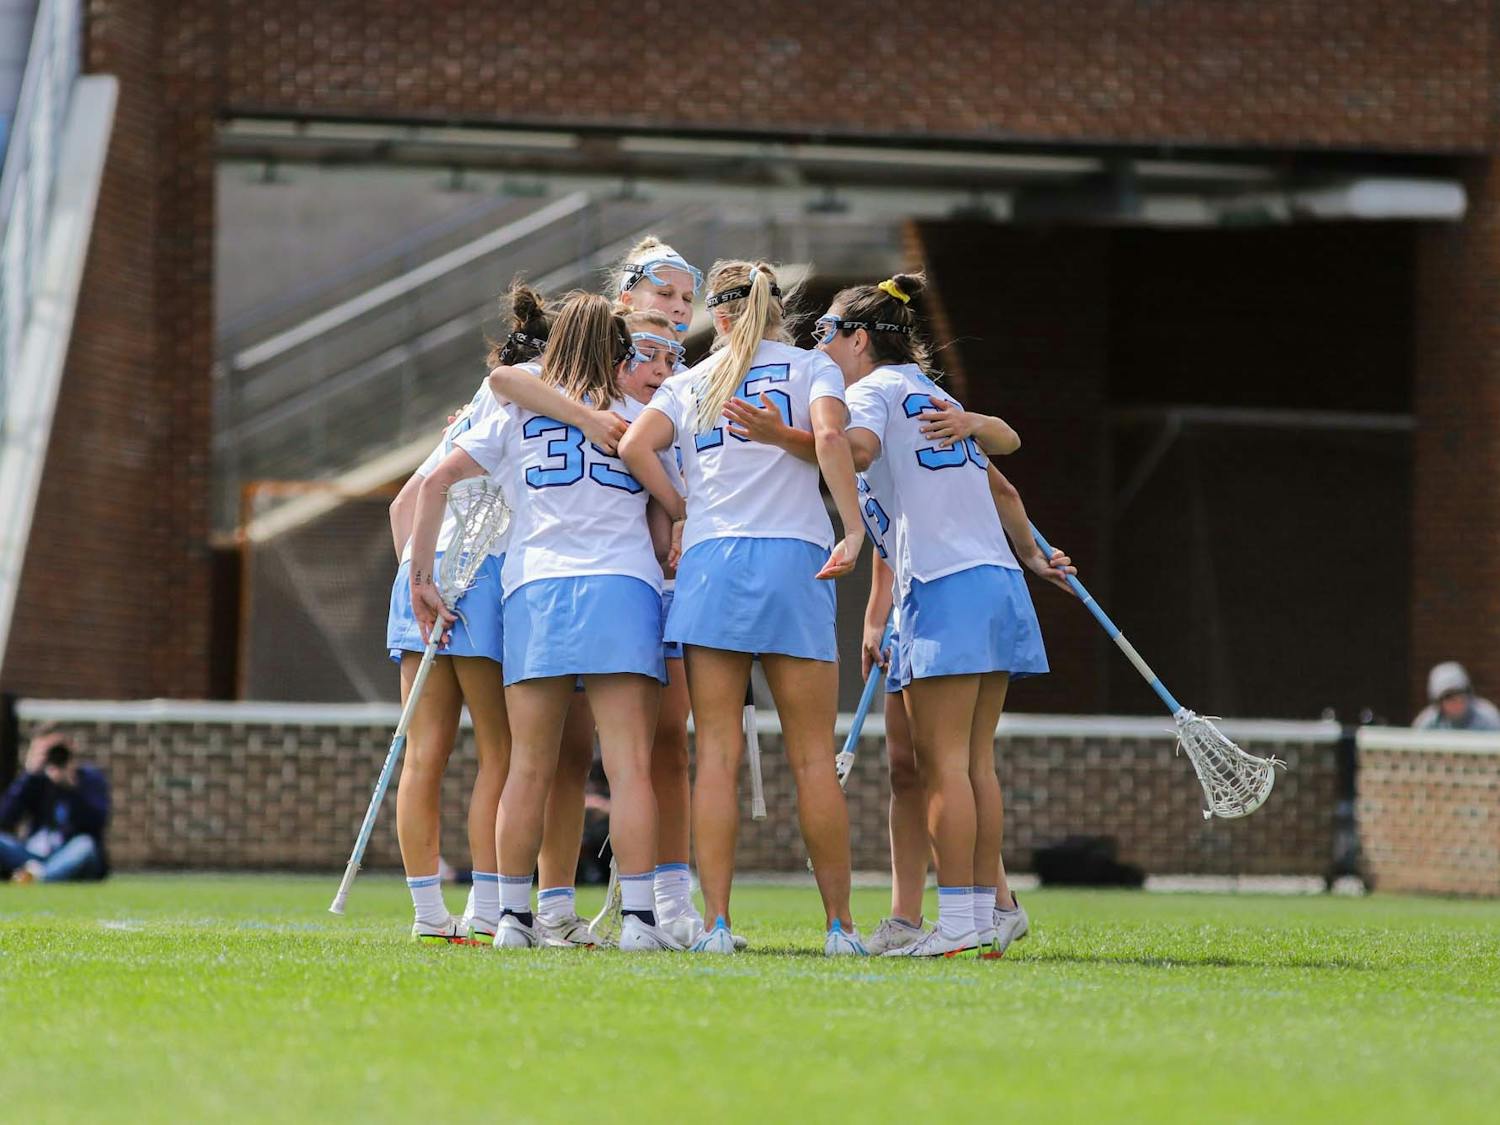 UNC women's lacrosse players embrace after a goal against Virginia Tech on Saturday, March 26, 2022, at Dorrance Field. UNC won 20-8.